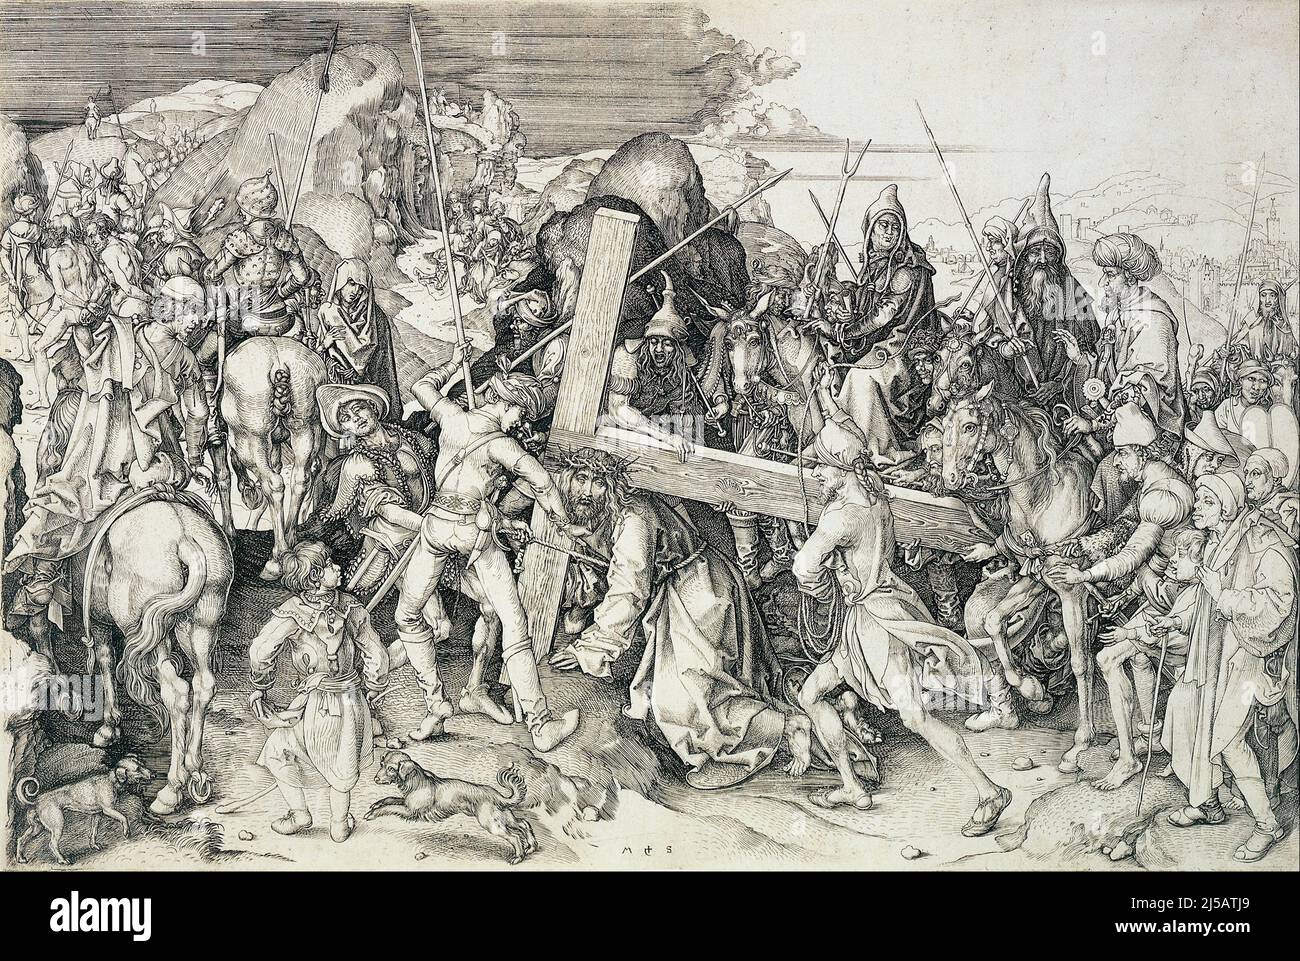 Germany: 'Christ Bearing His Cross'. Ink engraving by Martin Schongauer (c. 1450 - 2 February 1491), c. 1470-1480.  Faltering under the weight of the cross, Jesus Christ falls on the road to Golgotha where he is to be crucified. A Roman guard drags him while another whips him. The Virgin Mary is being comforted behind the chaotic crowd. Two naked prisoners who will face crucifixion alongside Christ walk ahead, their hands tied behind their backs. In the background stands Jerusalem. Stock Photo